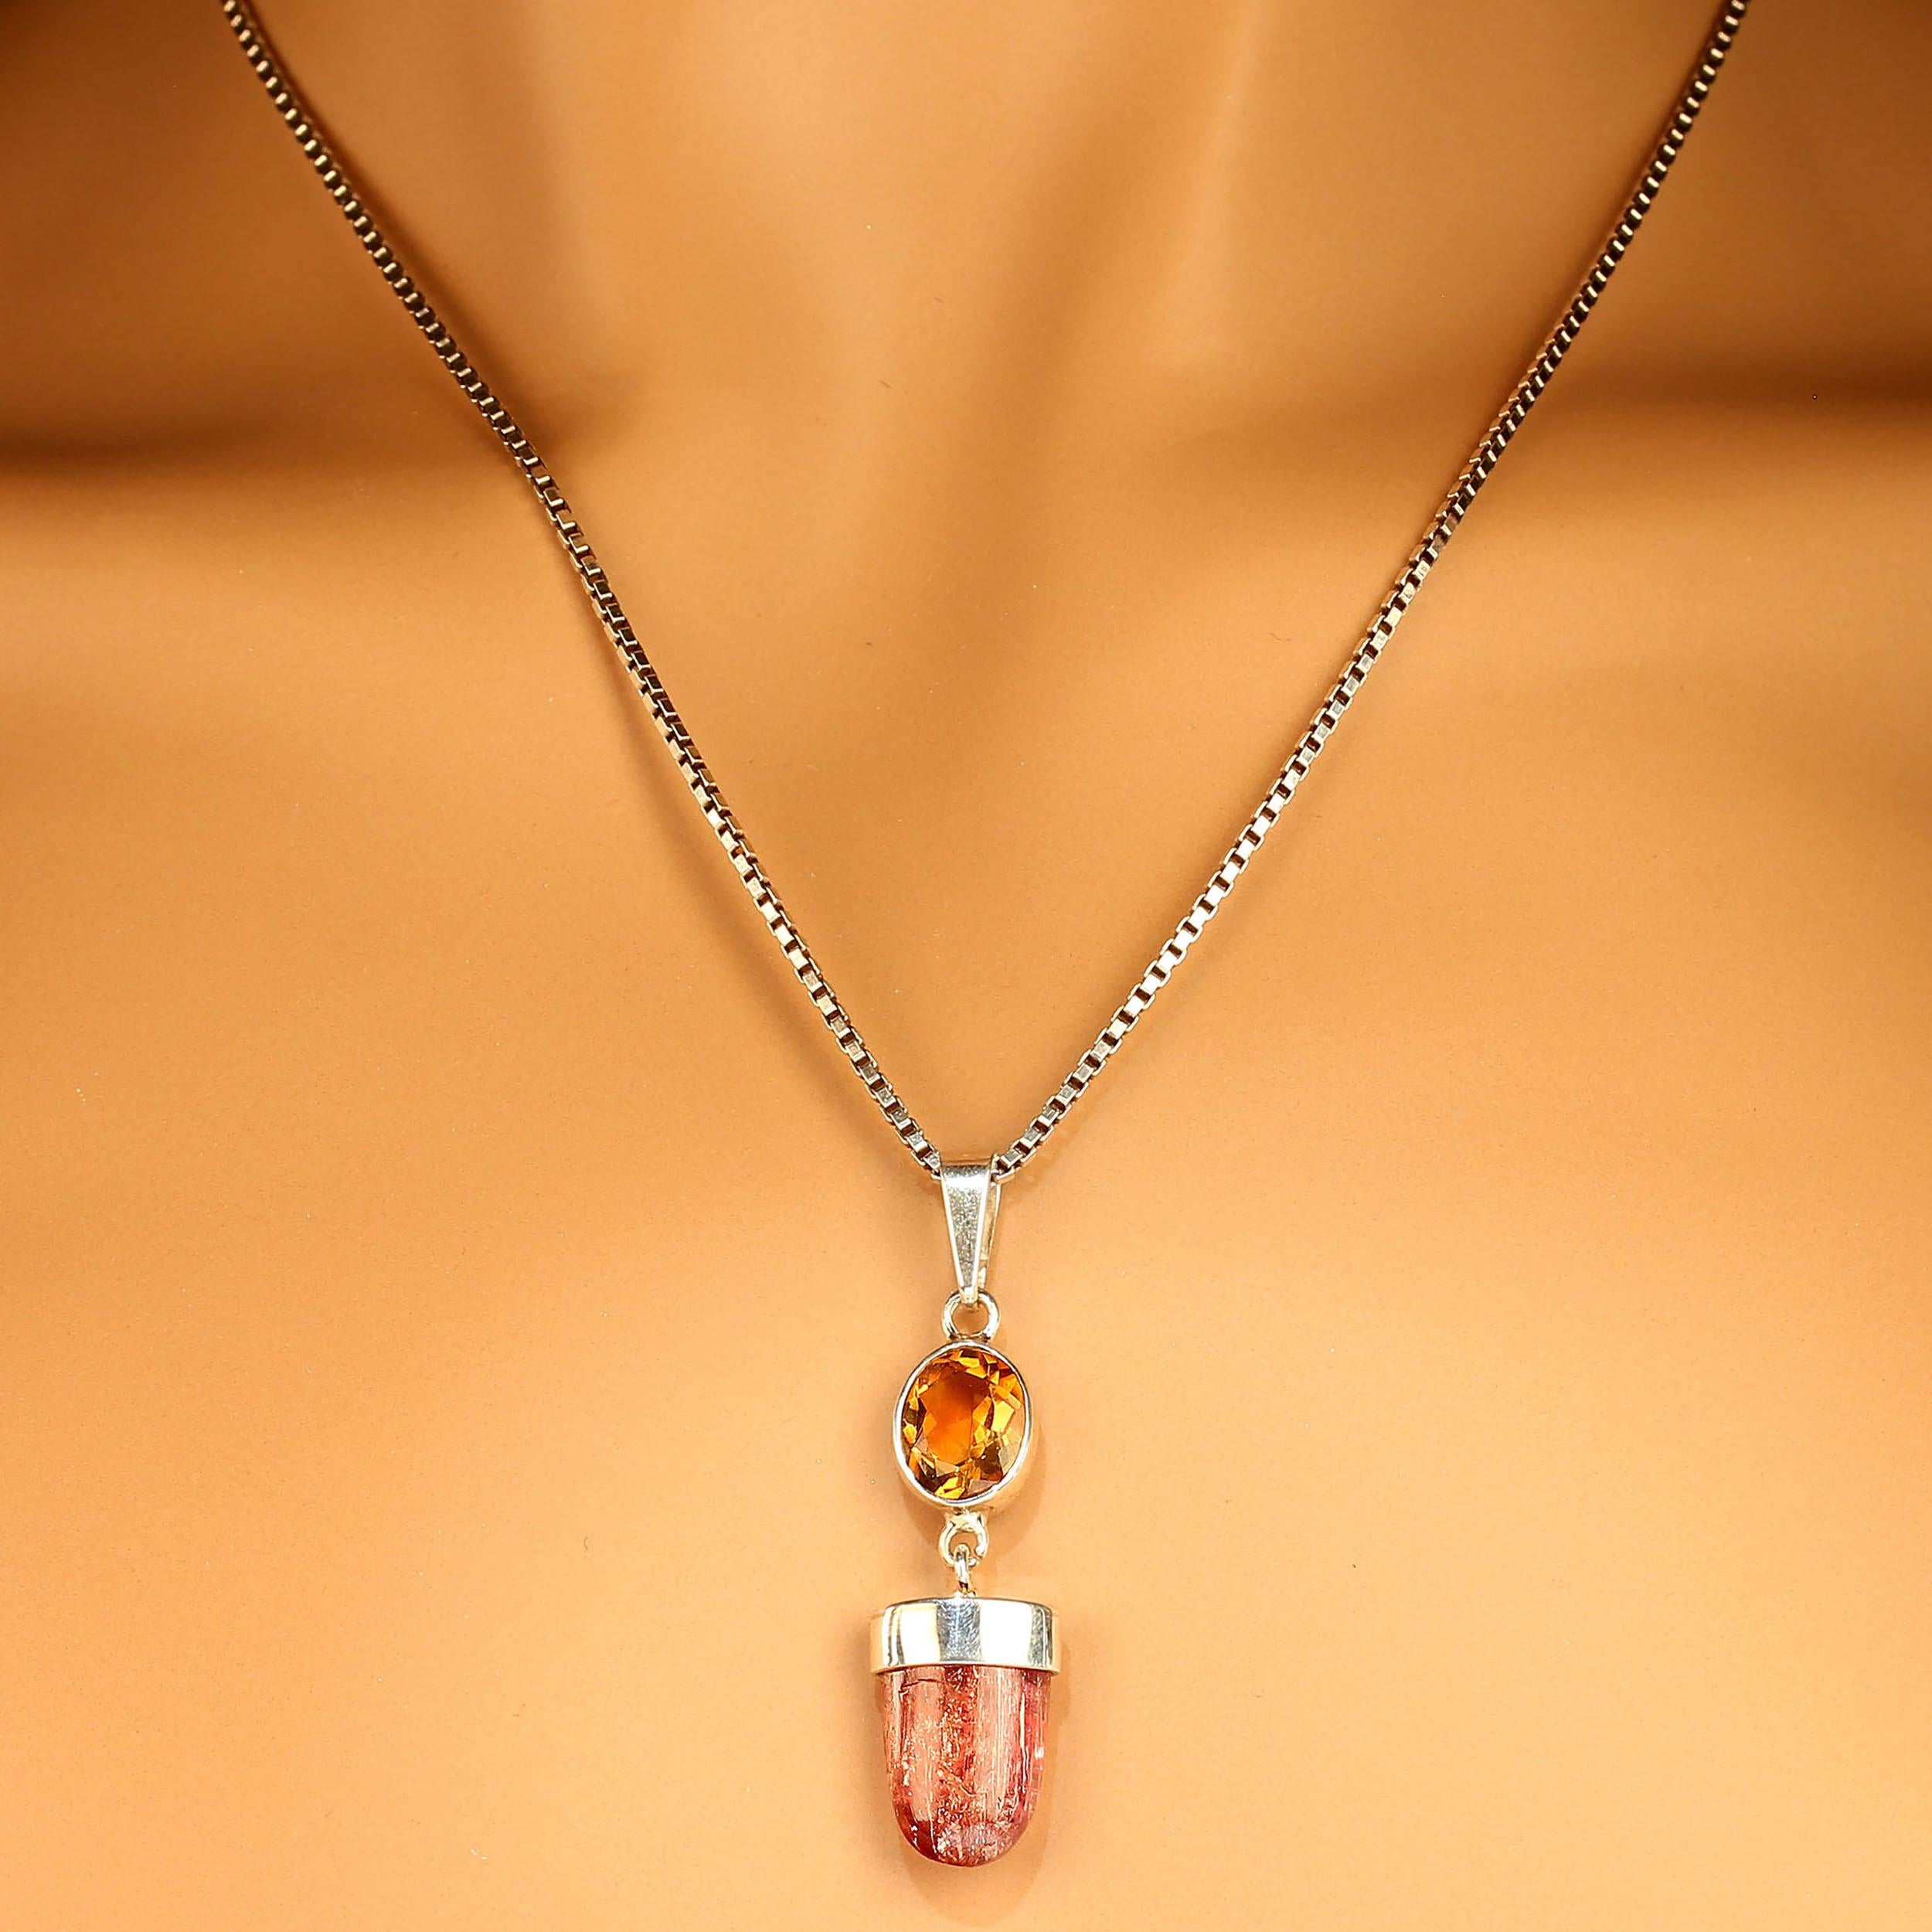 One of a kind pendant of 2.35 carat oval golden Citrine with a smooth bullet shaped Imperial Topaz hanging from it.  These are beautiful Brazilian gemstones selected from one of our favorite vendors in Belo Horizonte, Minas Gerais, Brazil, and set